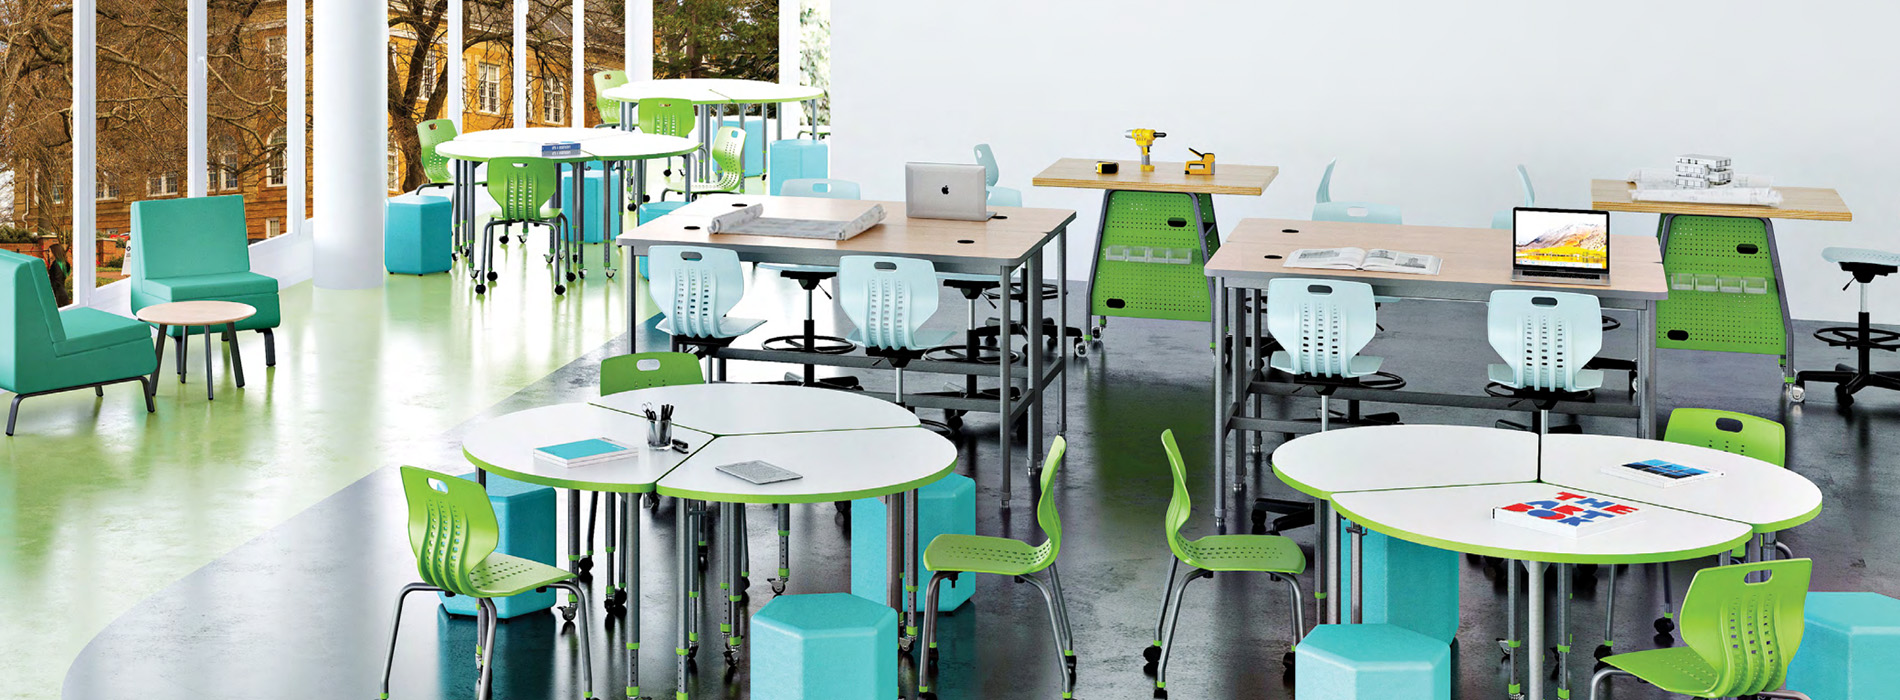 Options, options, options! Have you seen all the different shapes and colors available for the Maker®Invent™Series Tables by Paragon?The combinations are endless! Thisinnovative product can be customized to meet the needs of your unique learning space. Students and teachers will be thrilled to utilize fun looking productsthat enhance their learning. Boring tables and chairs are a thing of the past. Paragon’s designs are not from your grandma’s school. These creative furnishings are a great way to boost the excitement for modern day learners. Theyare state of the art specifically designed for flexibility, functionality, durability, and a cool look too!